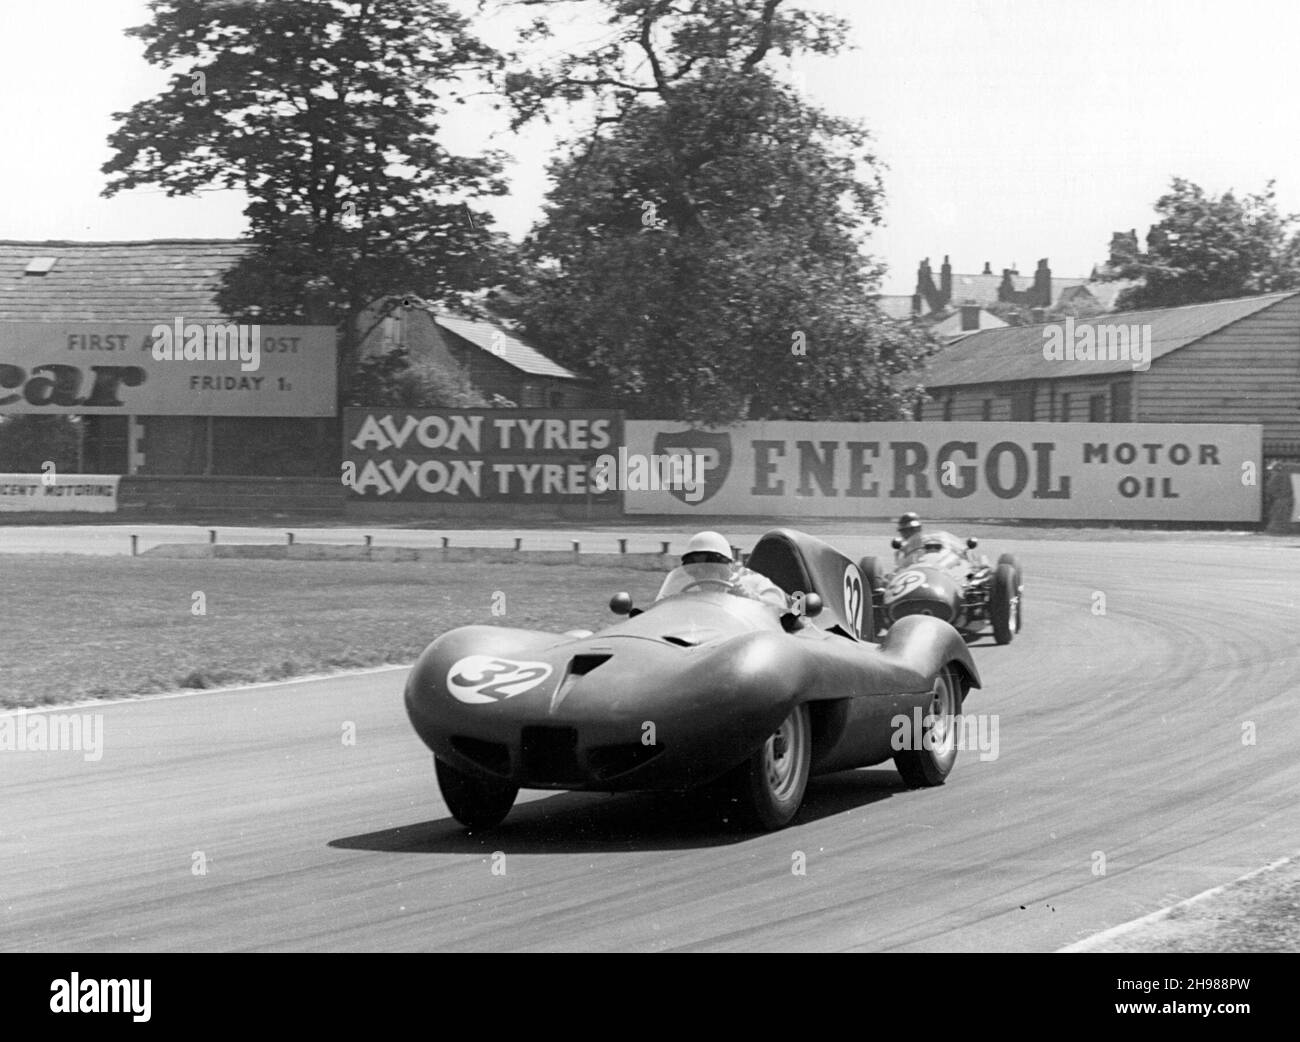 Connaught B-Alta of Ken McAlpine, British Grand Prix, Aintree, Merseyside, 1955. McAlpine retired from the race after 30 laps due to oil pressure. Stock Photo